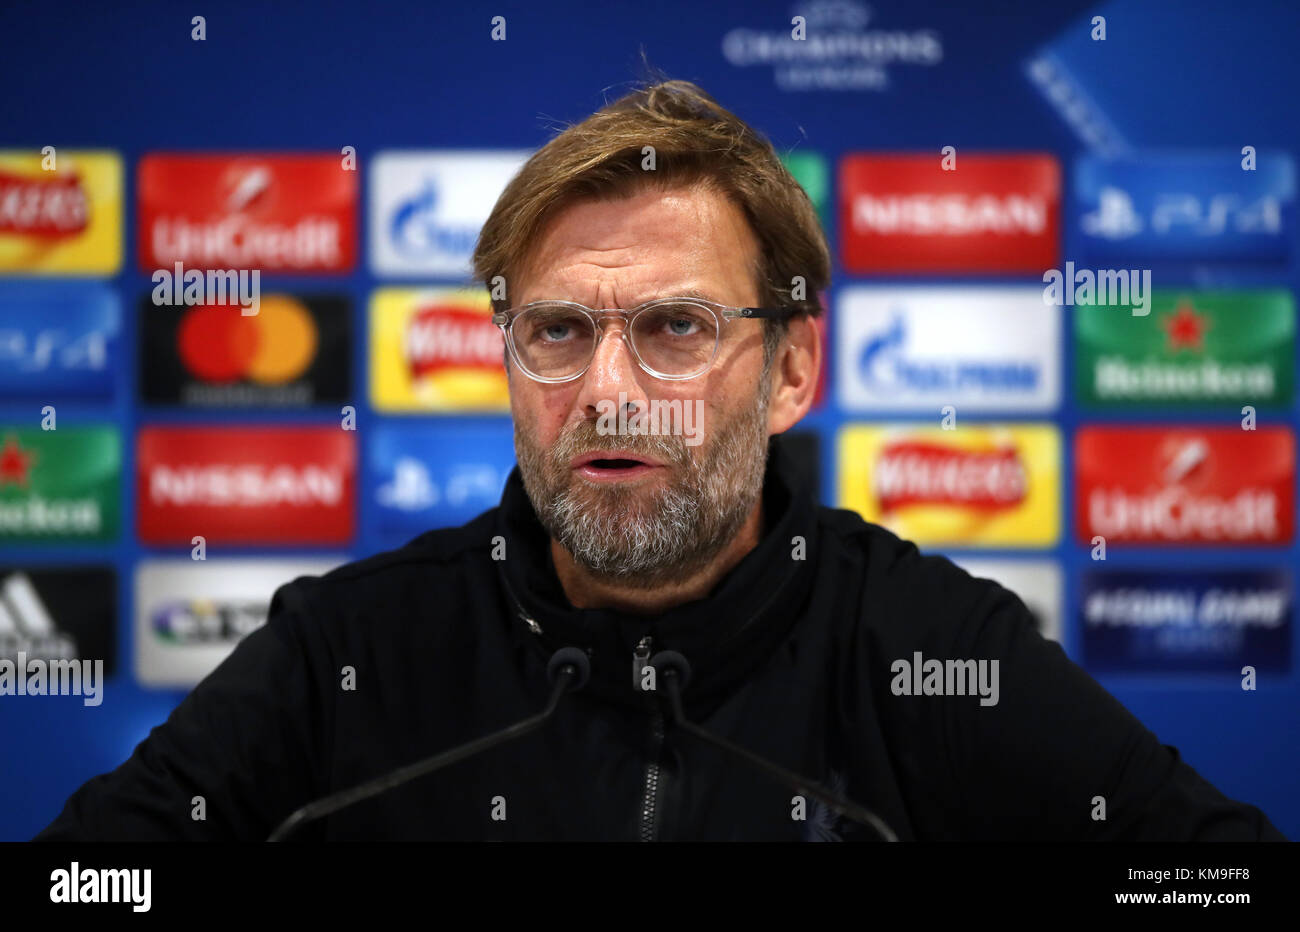 Liverpool manager Jurgen Klopp during a press conference at Anfield, Liverpool. PRESS ASSOCIATION Photo. Picture date: Tuesday December 5, 2017. See PA Story SOCCER Liverpool. Photo credit should read: Nick Potts/PA Wire Stock Photo